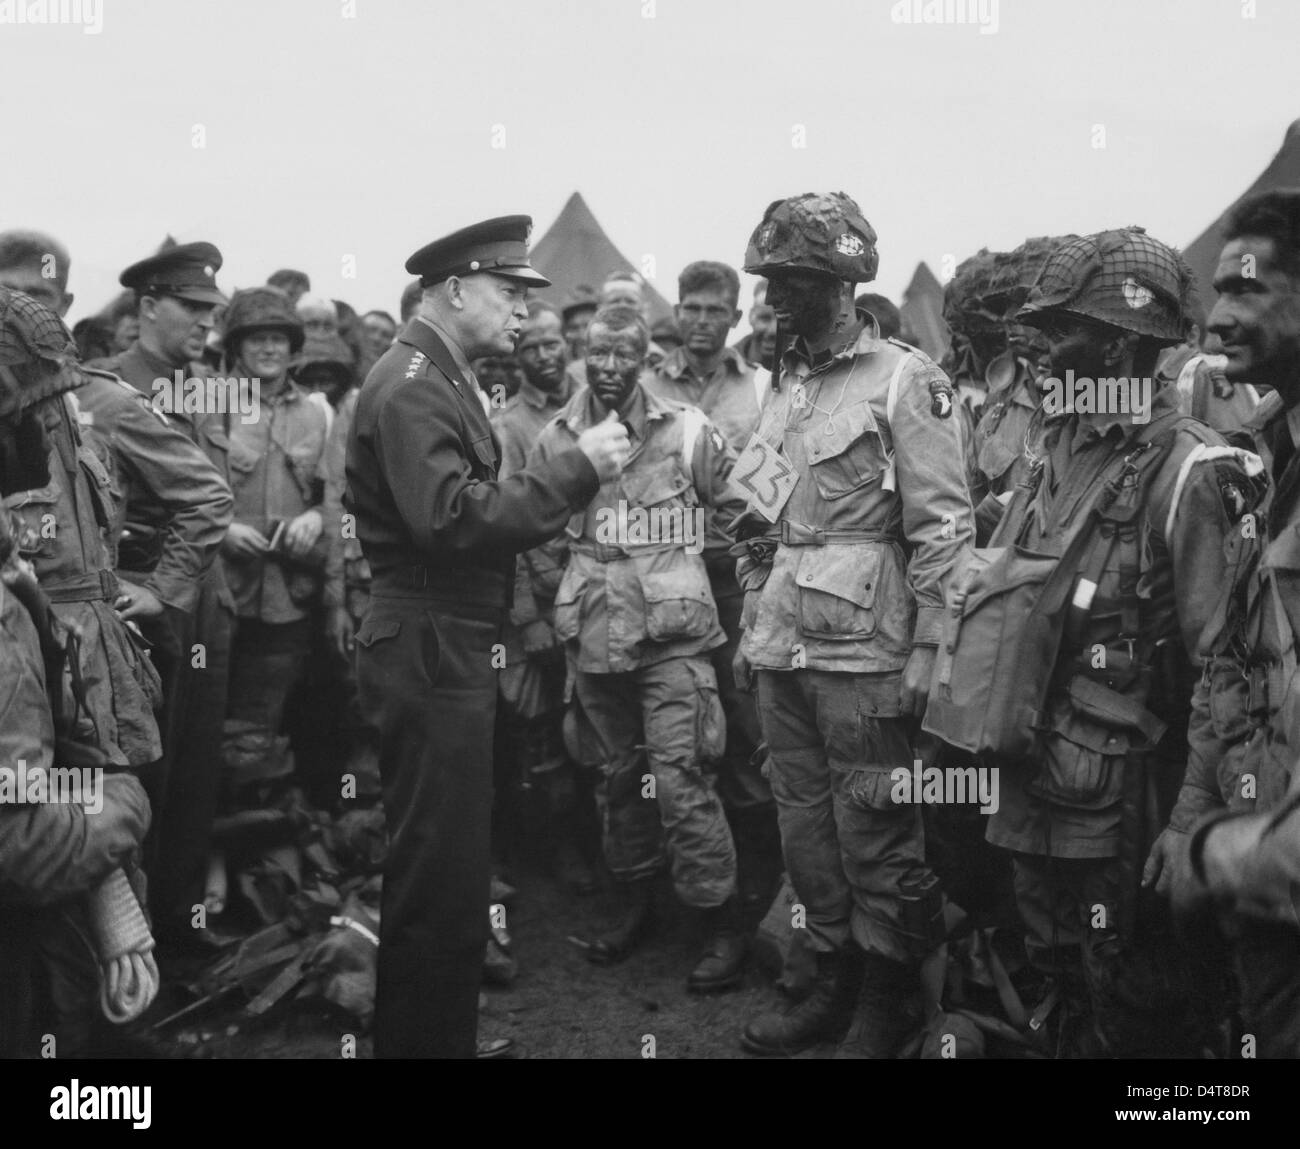 General Dwight D. Eisenhower talking with soldiers of the 101st Airborne Division. Stock Photo